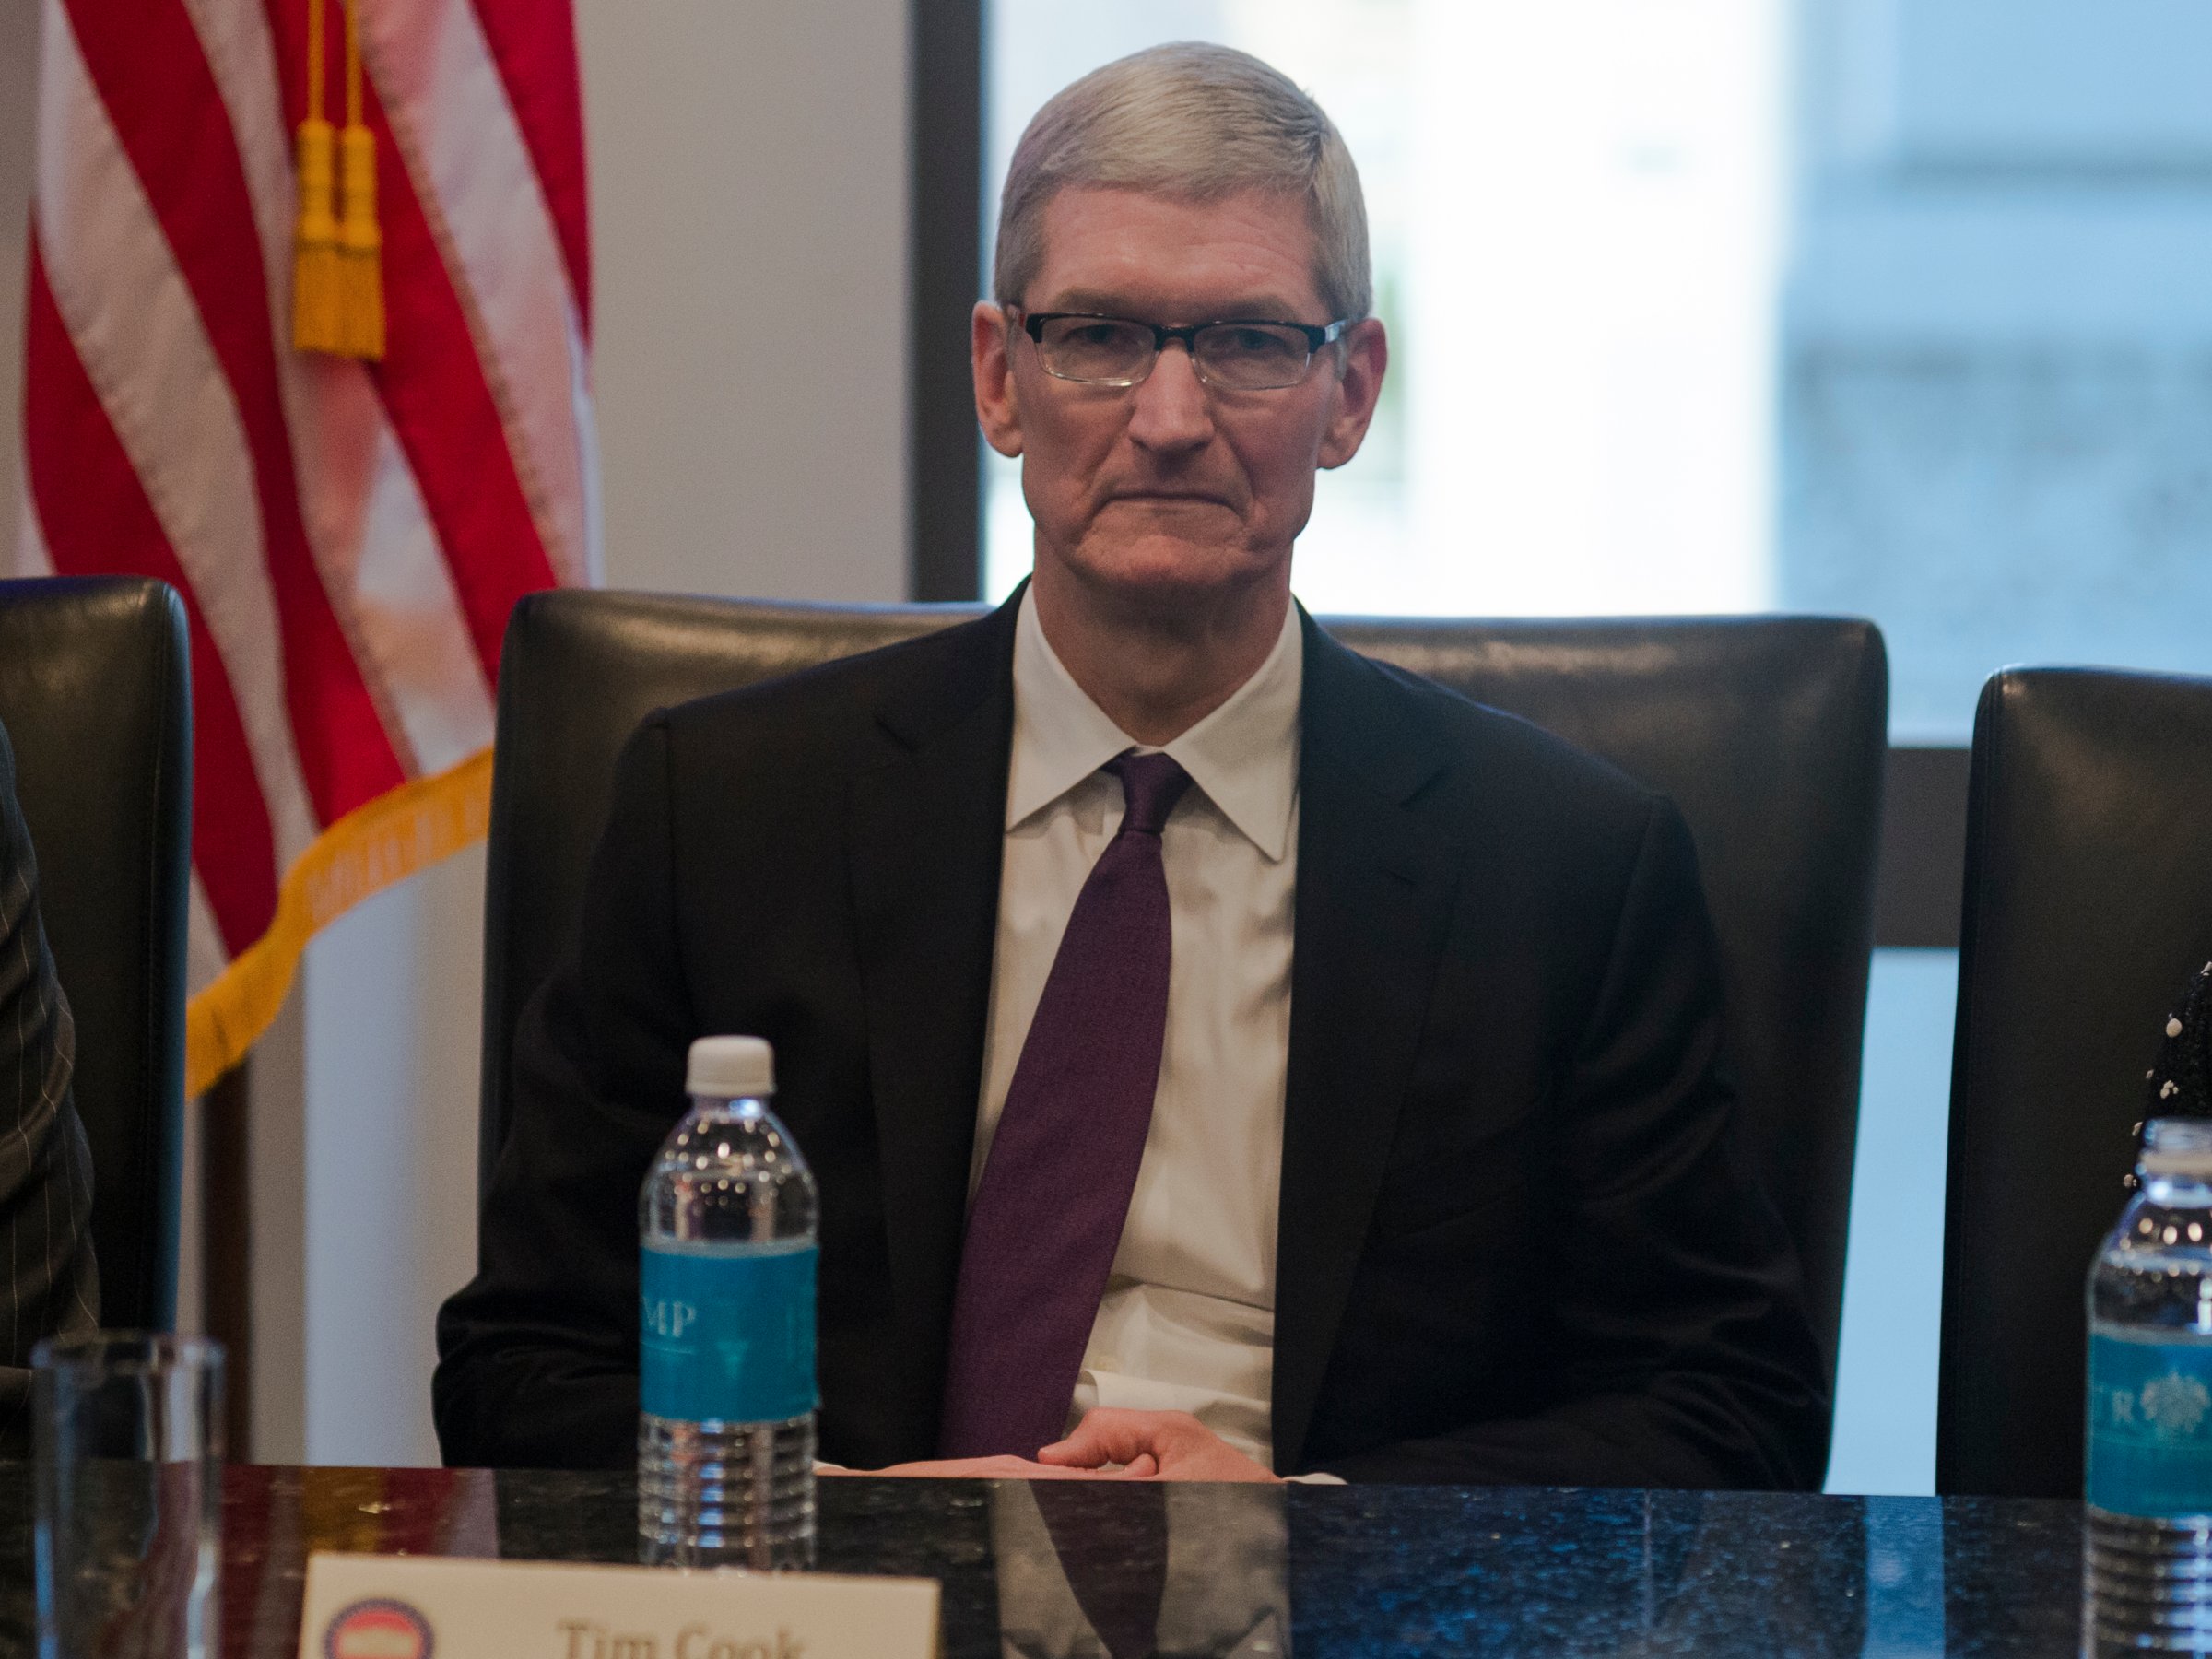 Apple CEO Tim Cook on meeting with Trump: 'You don’t change things by just yelling'